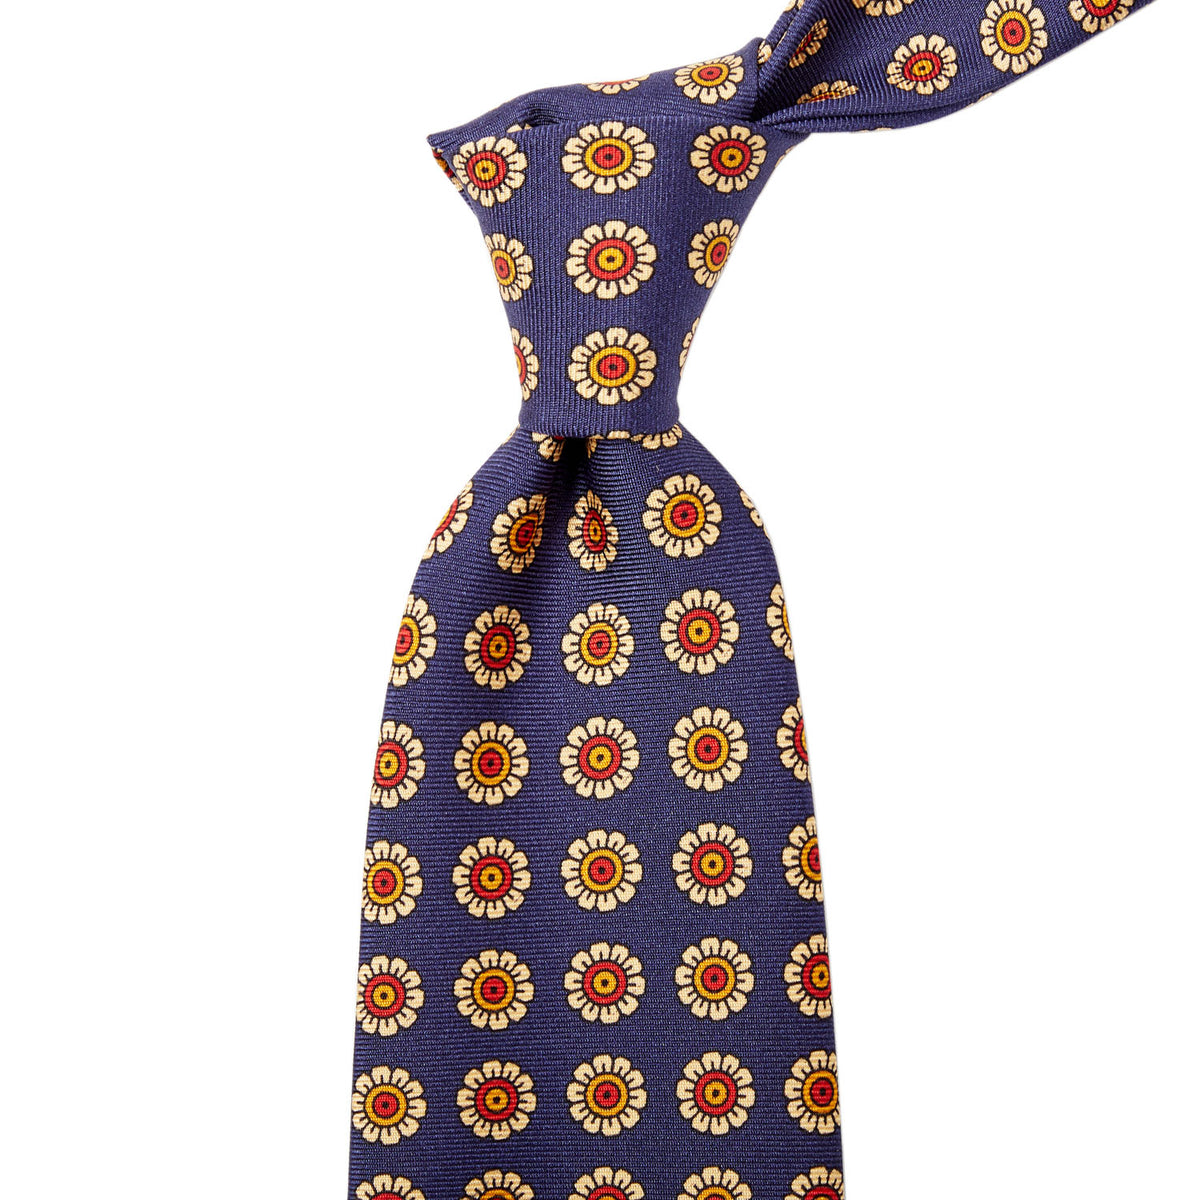 A KirbyAllison.com Sovereign Grade Navy Daisy Spring Madder Buff Tie (150x8.5 cm), with a flower pattern, made from 100% English silk, is of the highest quality and handmade.